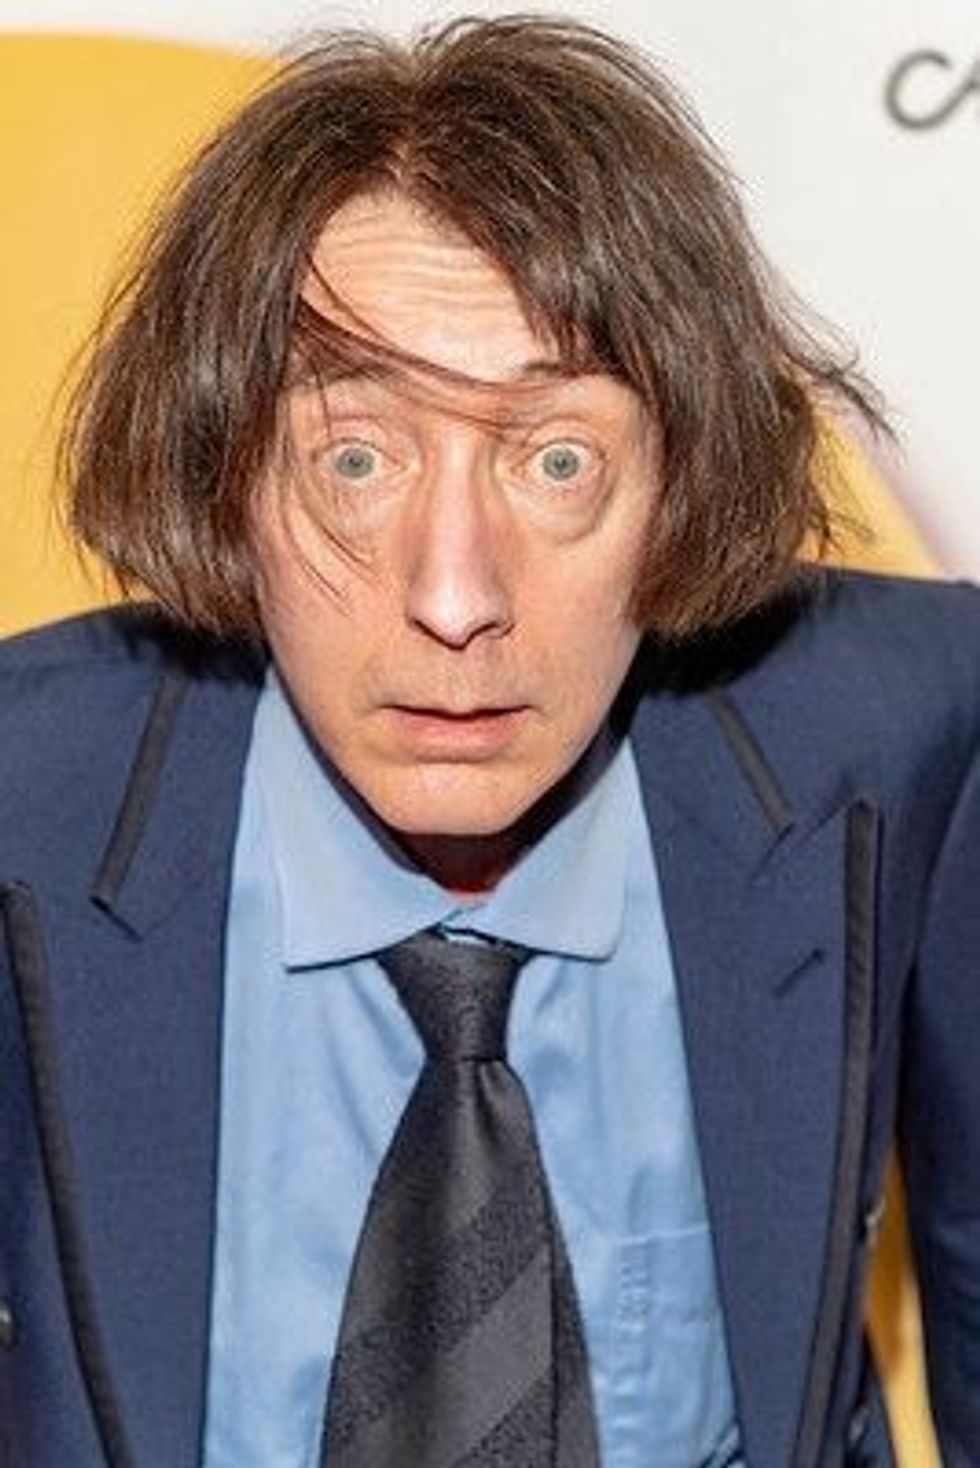 This article will provide you with some of the best Emo Philips quotes of all time. Happy reading!